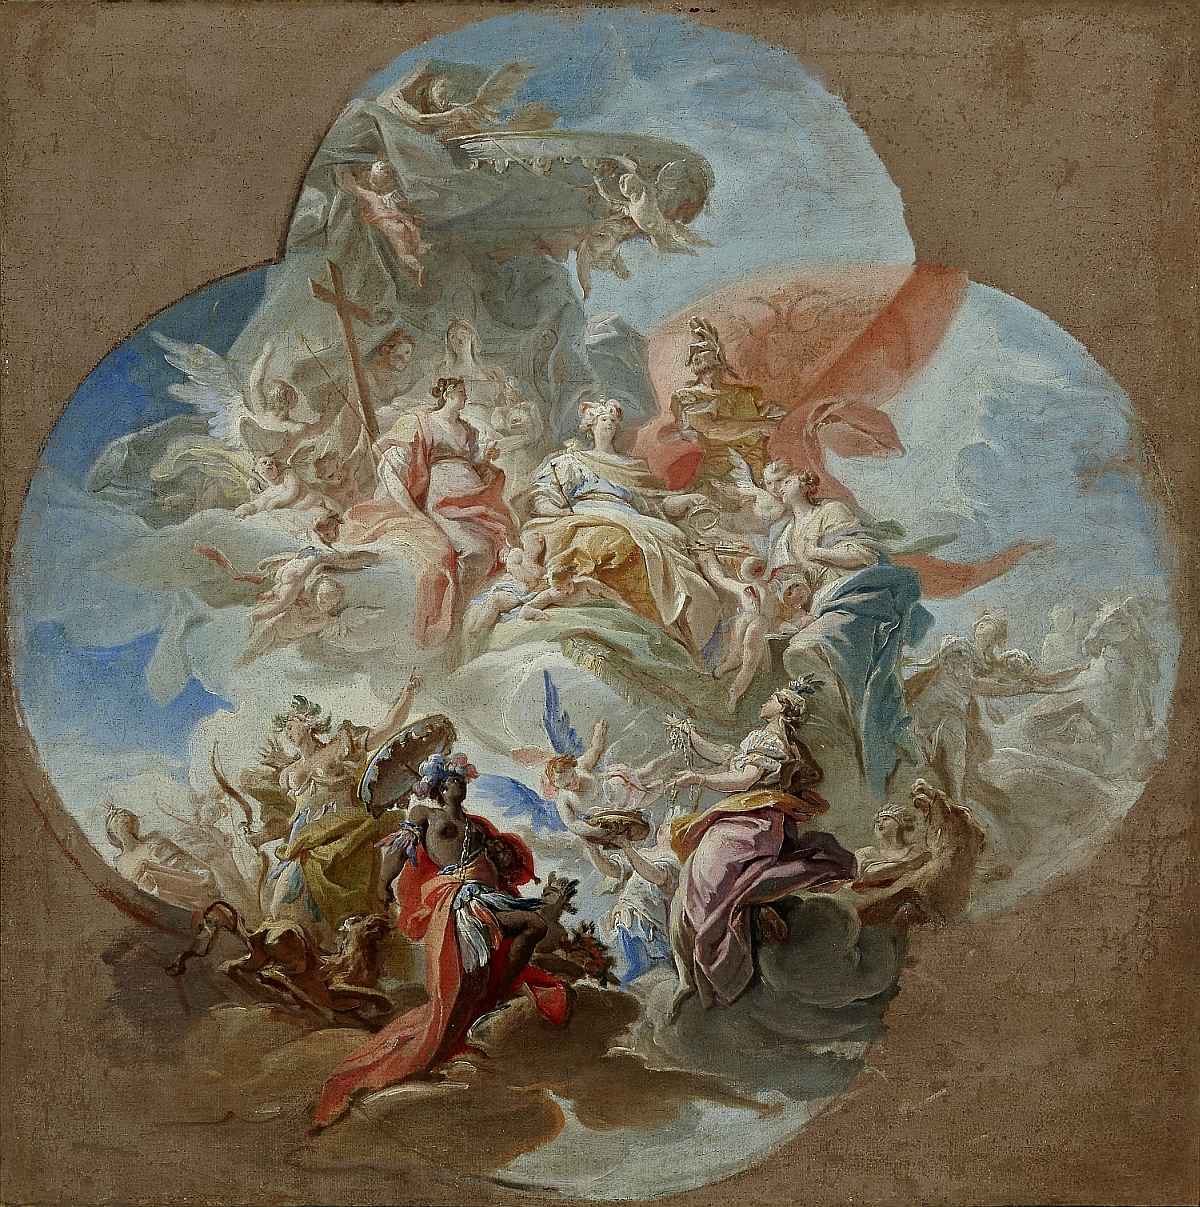 Austria Receives Homage from the Land of Upper Austria, Carlo Innocenzo Carlone, oil on canvas, inv. no. RO 0374; modello for a ceiling fresco (1717) in the Linz Landhaus (destroyed)